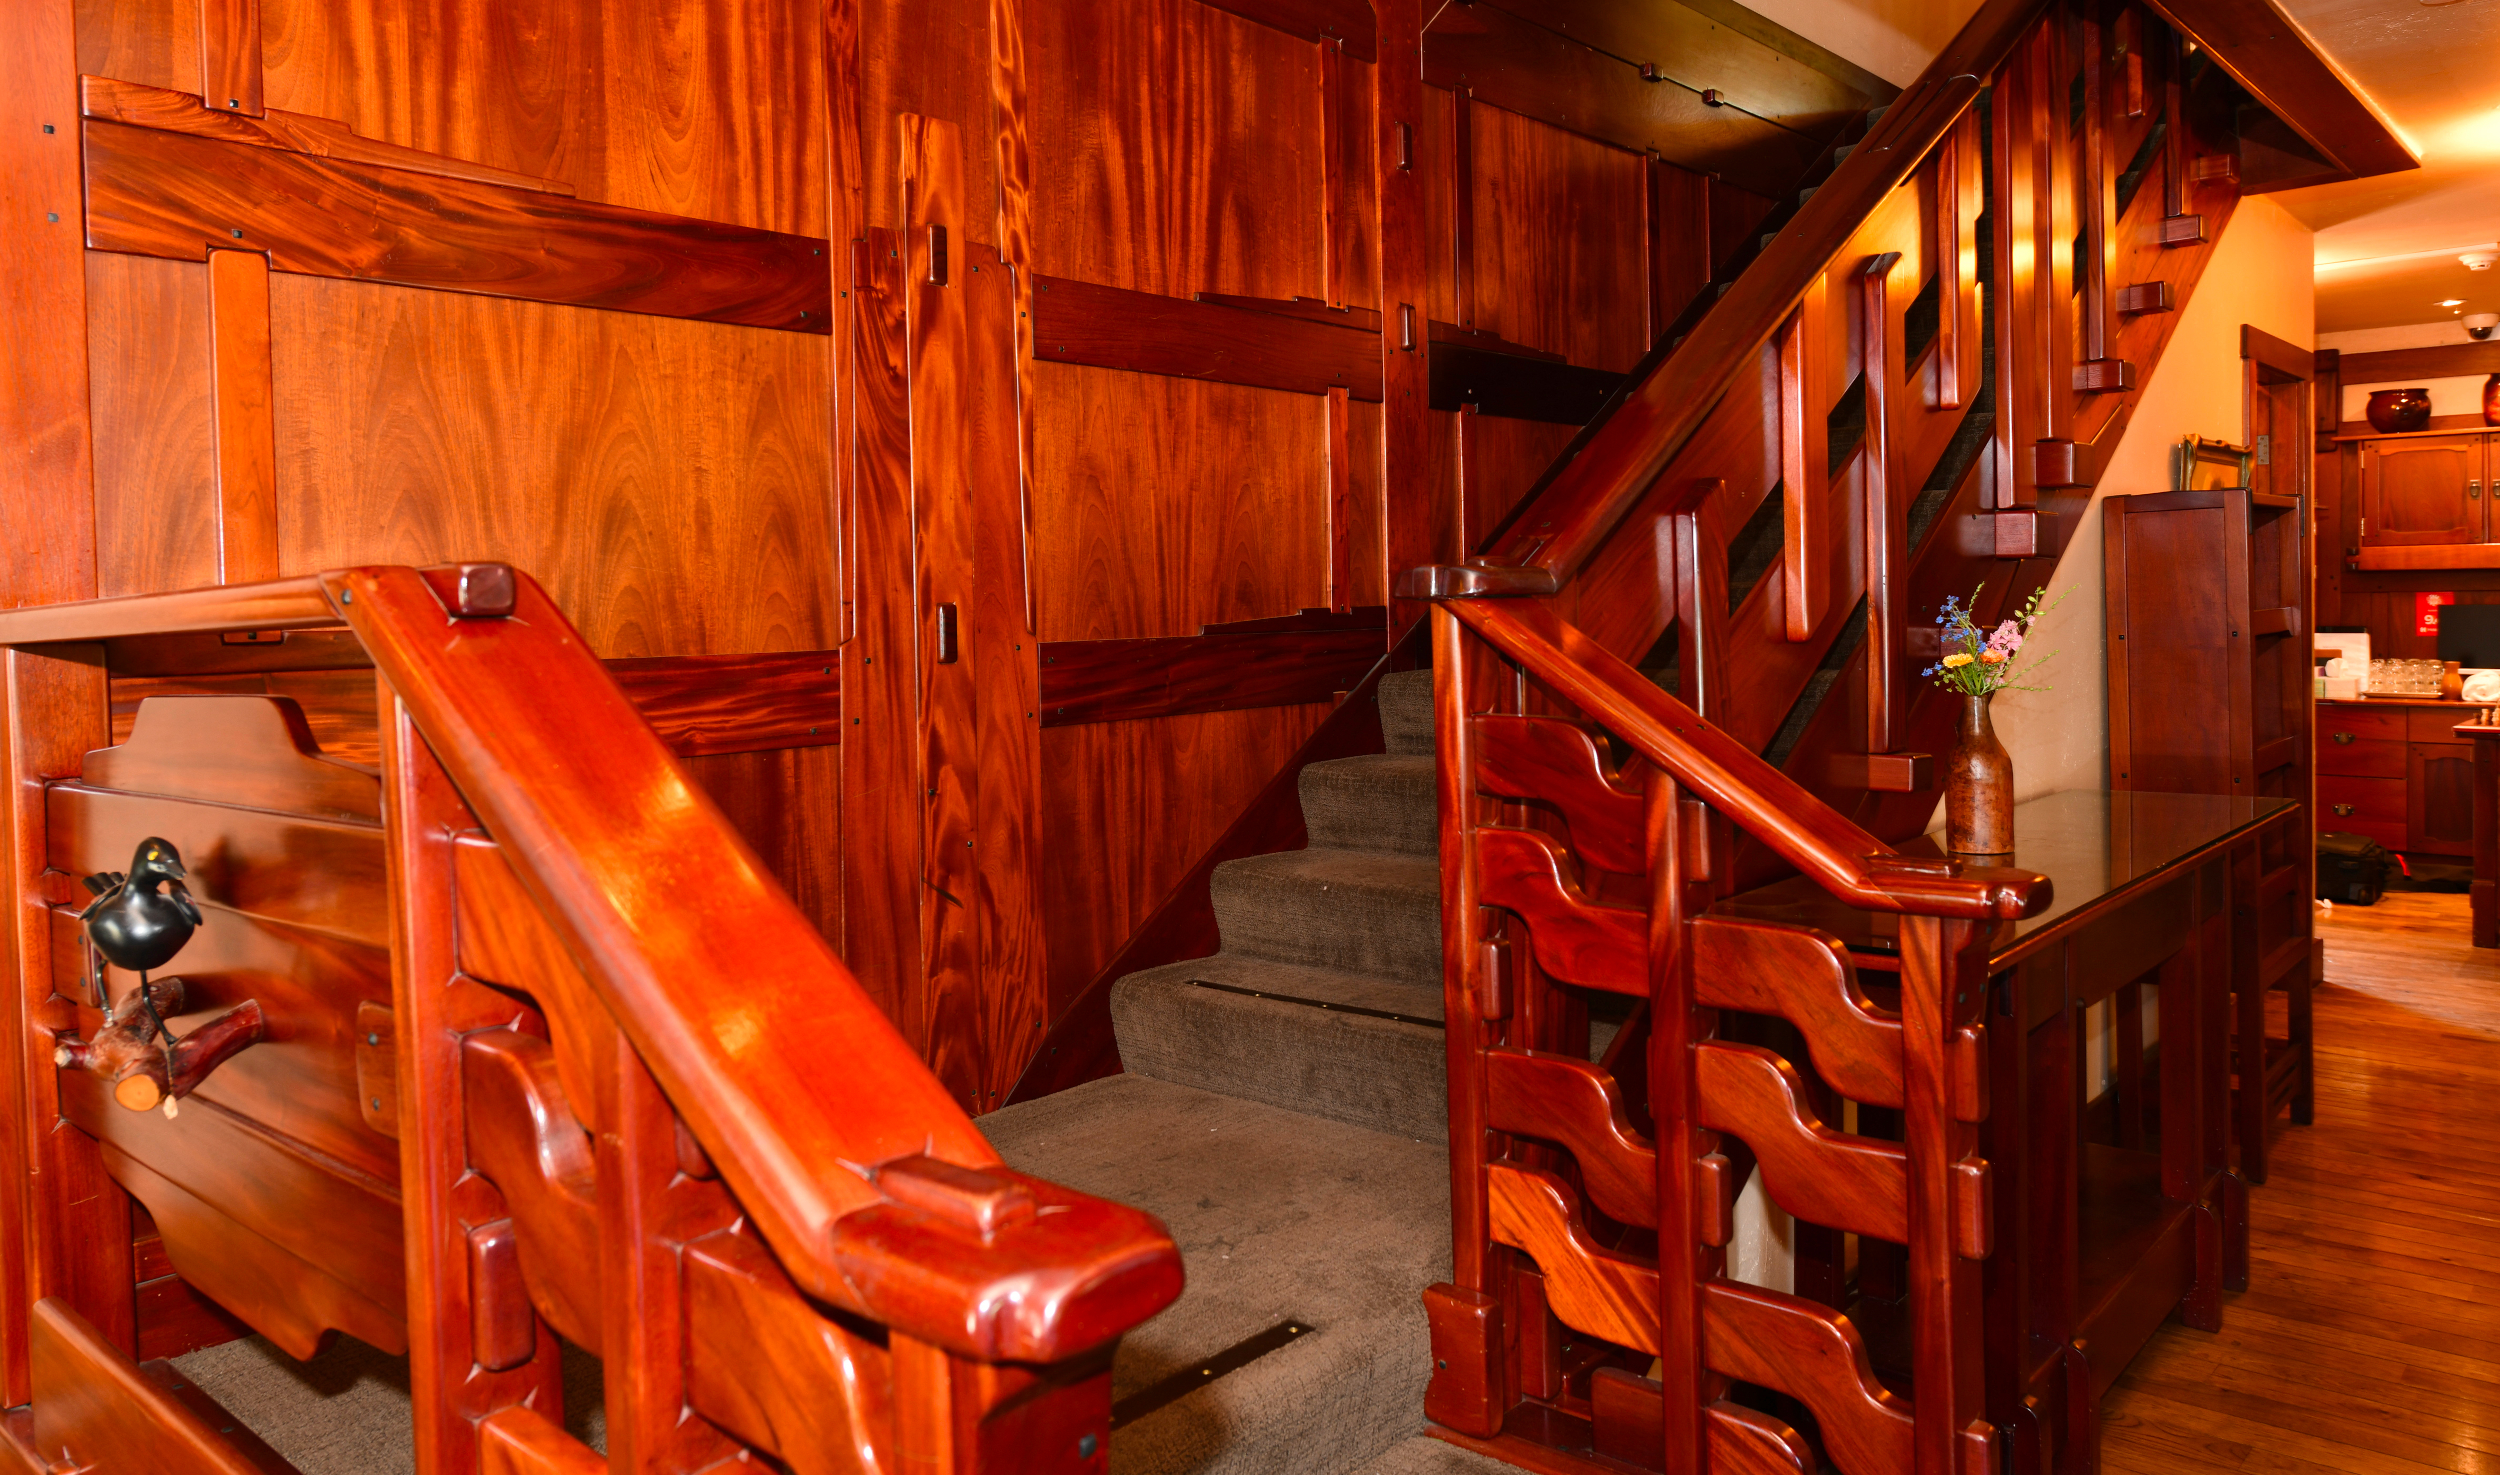 Main staircase of Blackbird Inn. Carved mahogany balustrade in wavy craftsman pattern surrounds green carpeted stairs. Back wall is mahogany paneling.